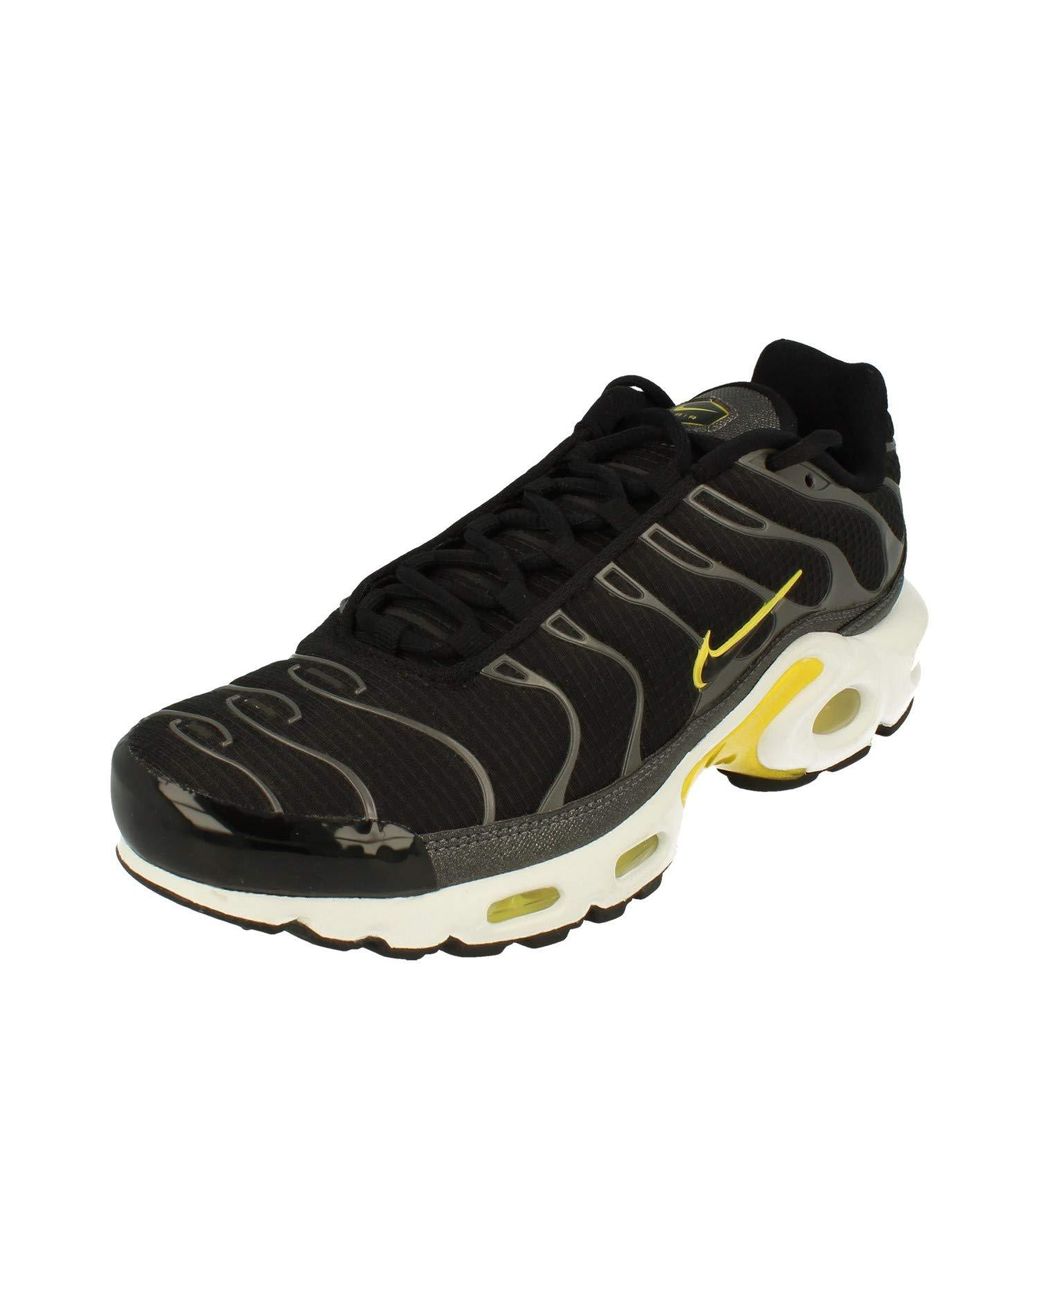 Nike Synthetic Original Air Max Plus Tunned 1 Tn Trainers Cn0142 001 (db20)  (4) - Save 30% - Lyst